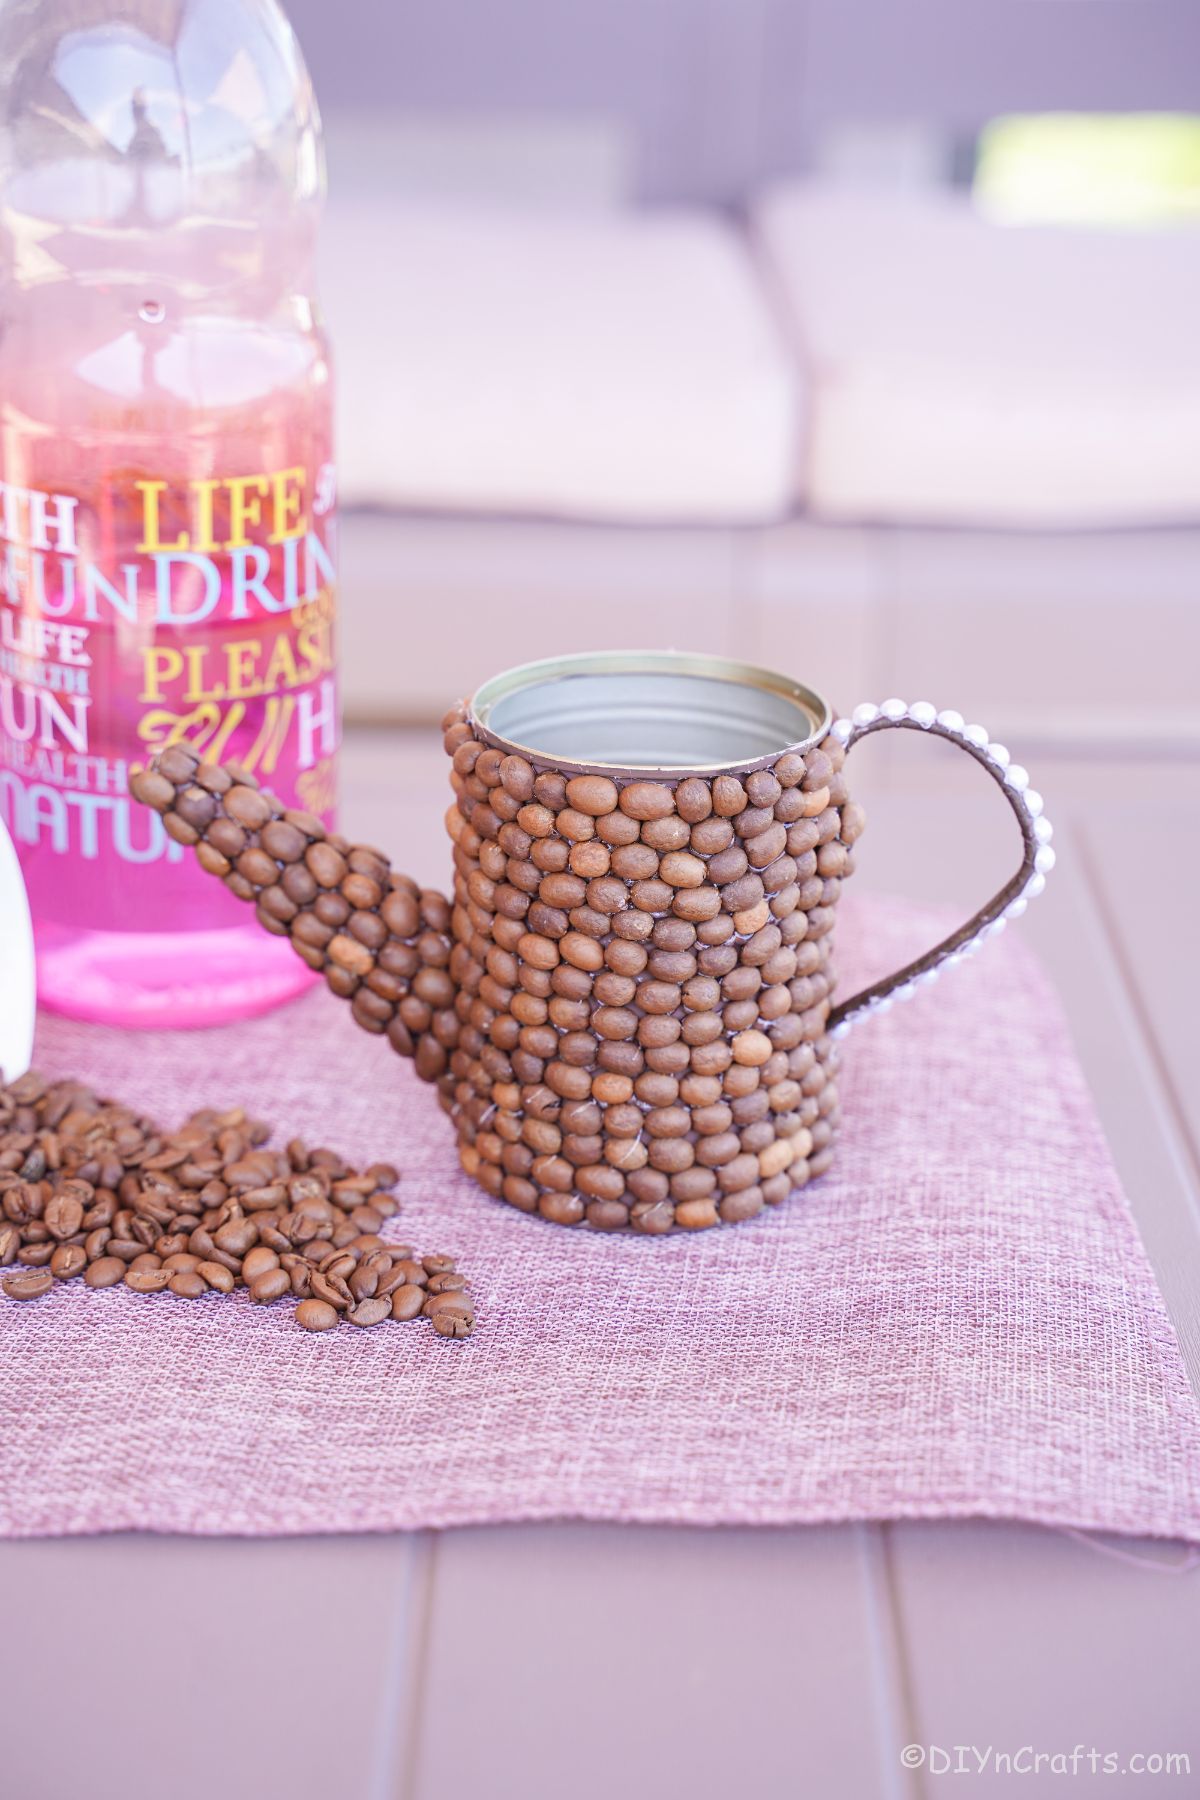 purple placemat beneath coffee bean watering can by pink colorful bottle